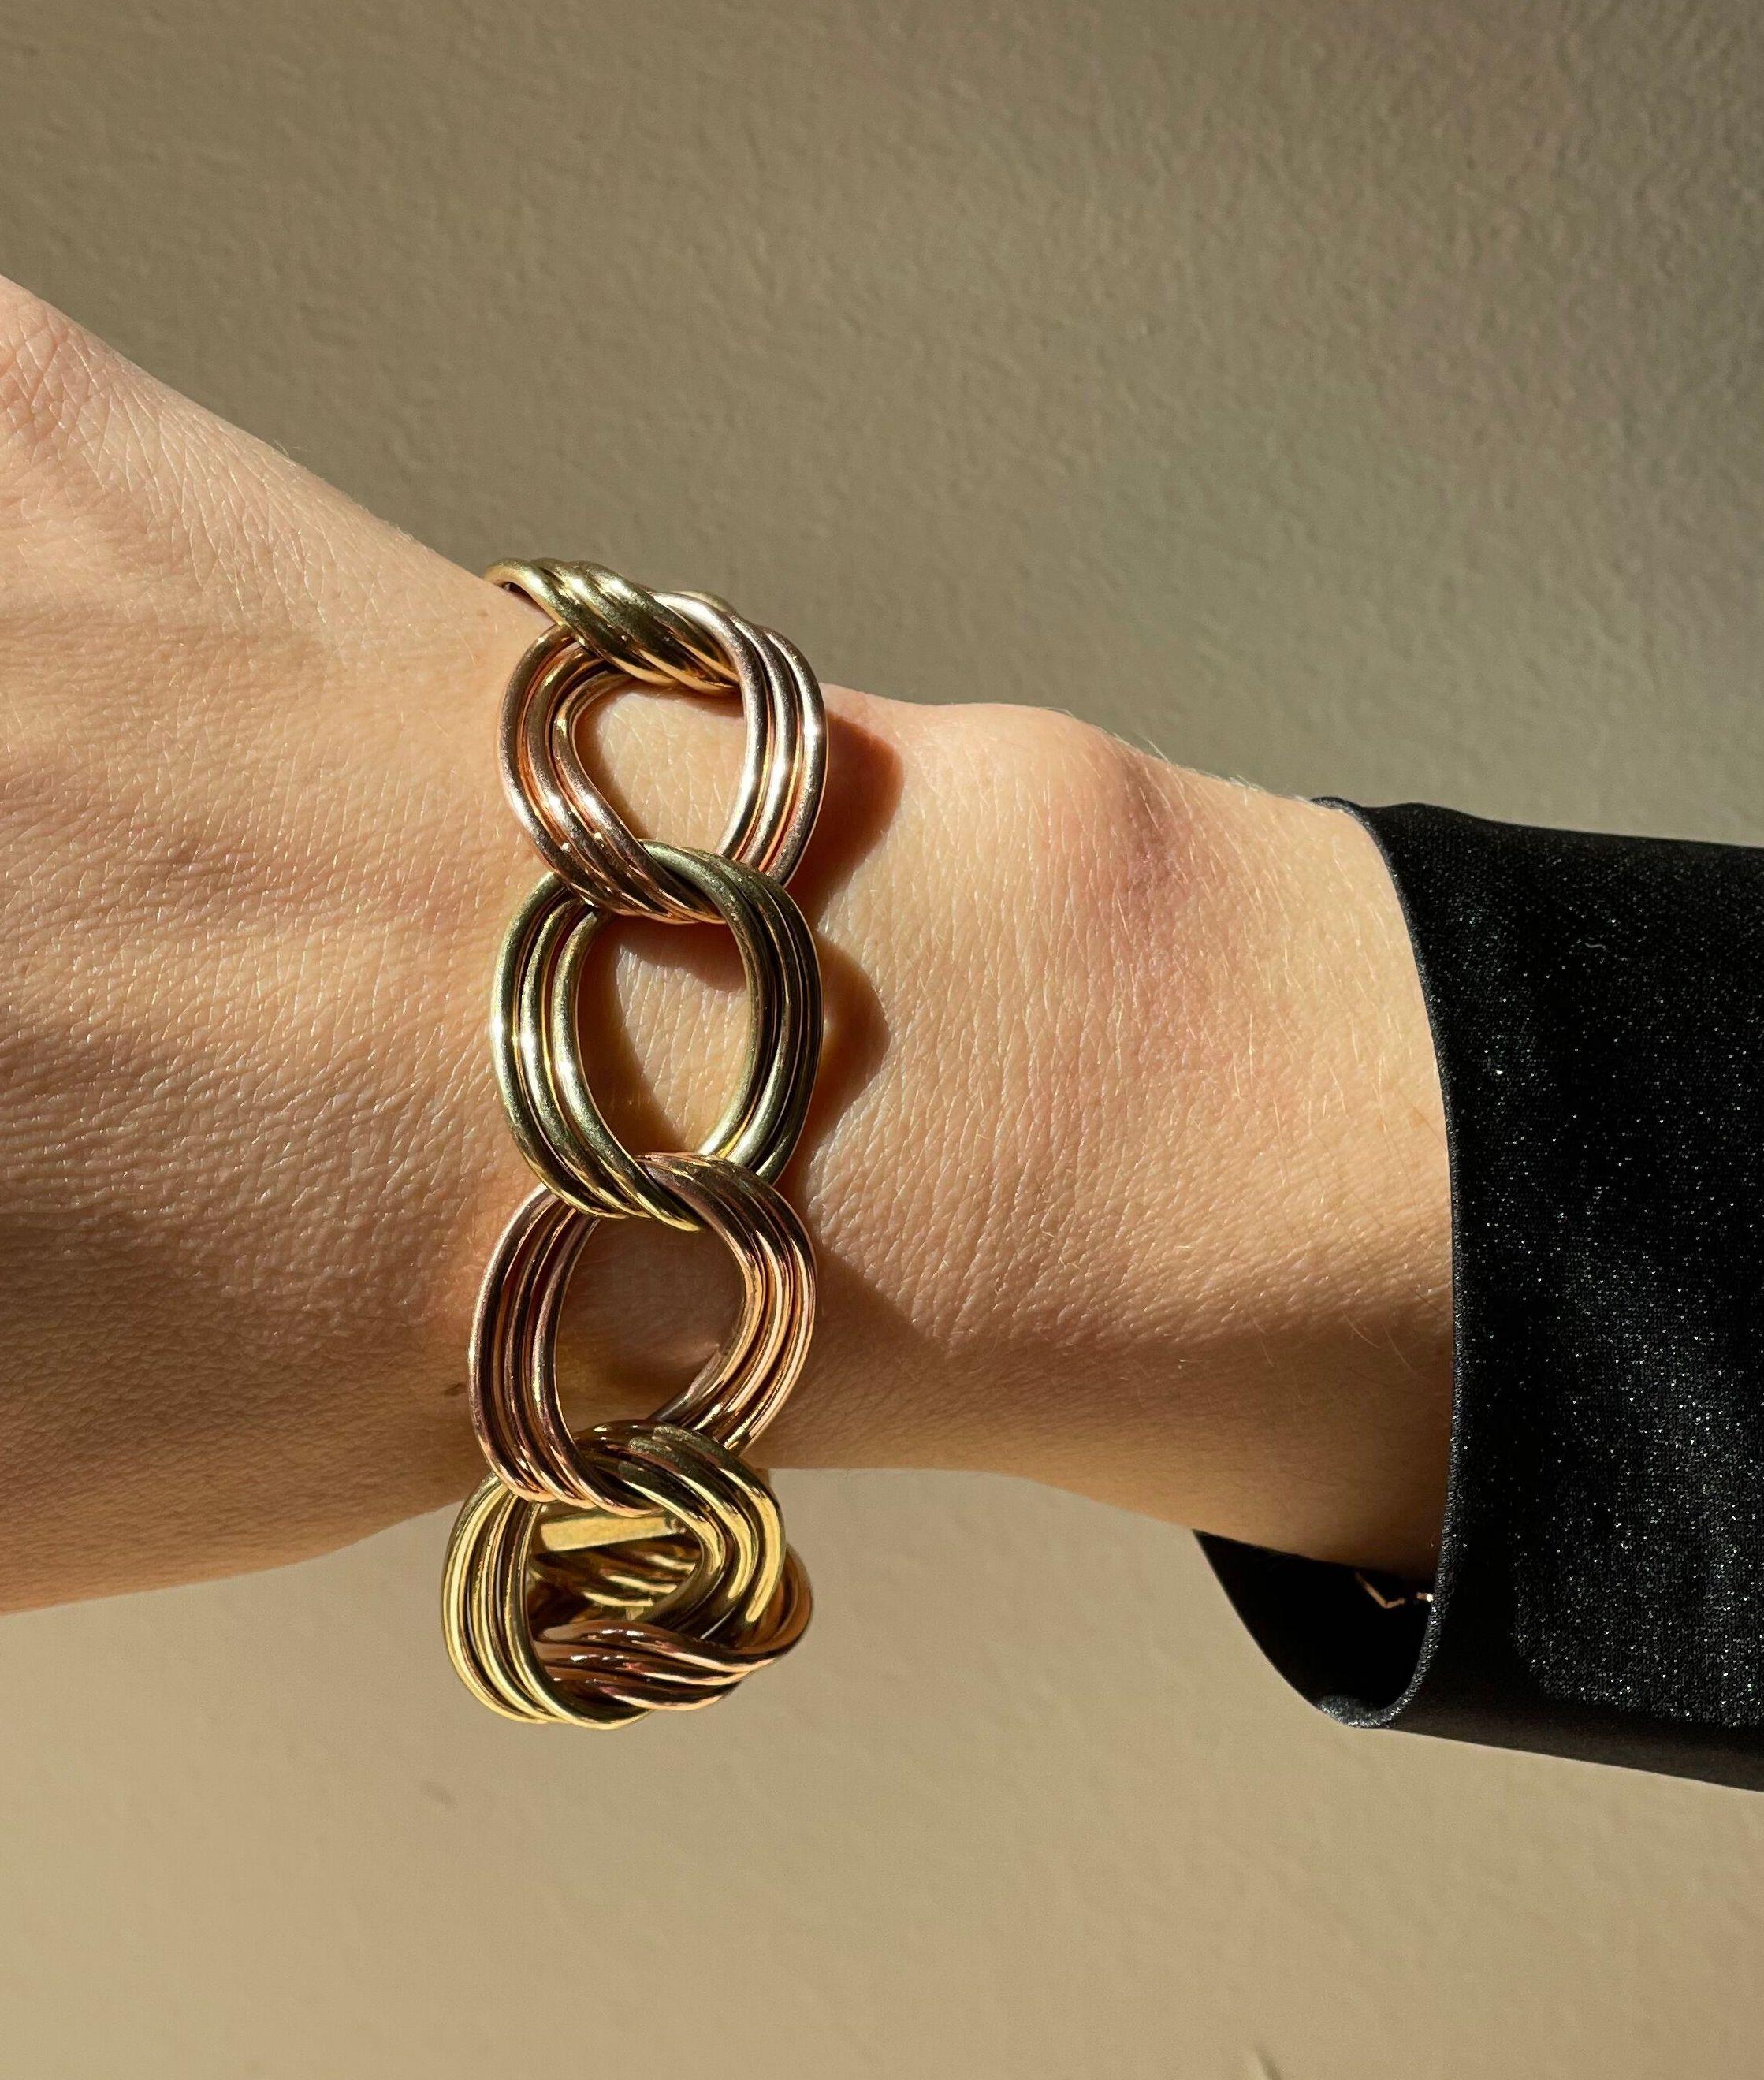 Midcentury 14k gold bracelet, featuring alternating rose and yellow gold links, each section has 3 links. Bracelet is 8